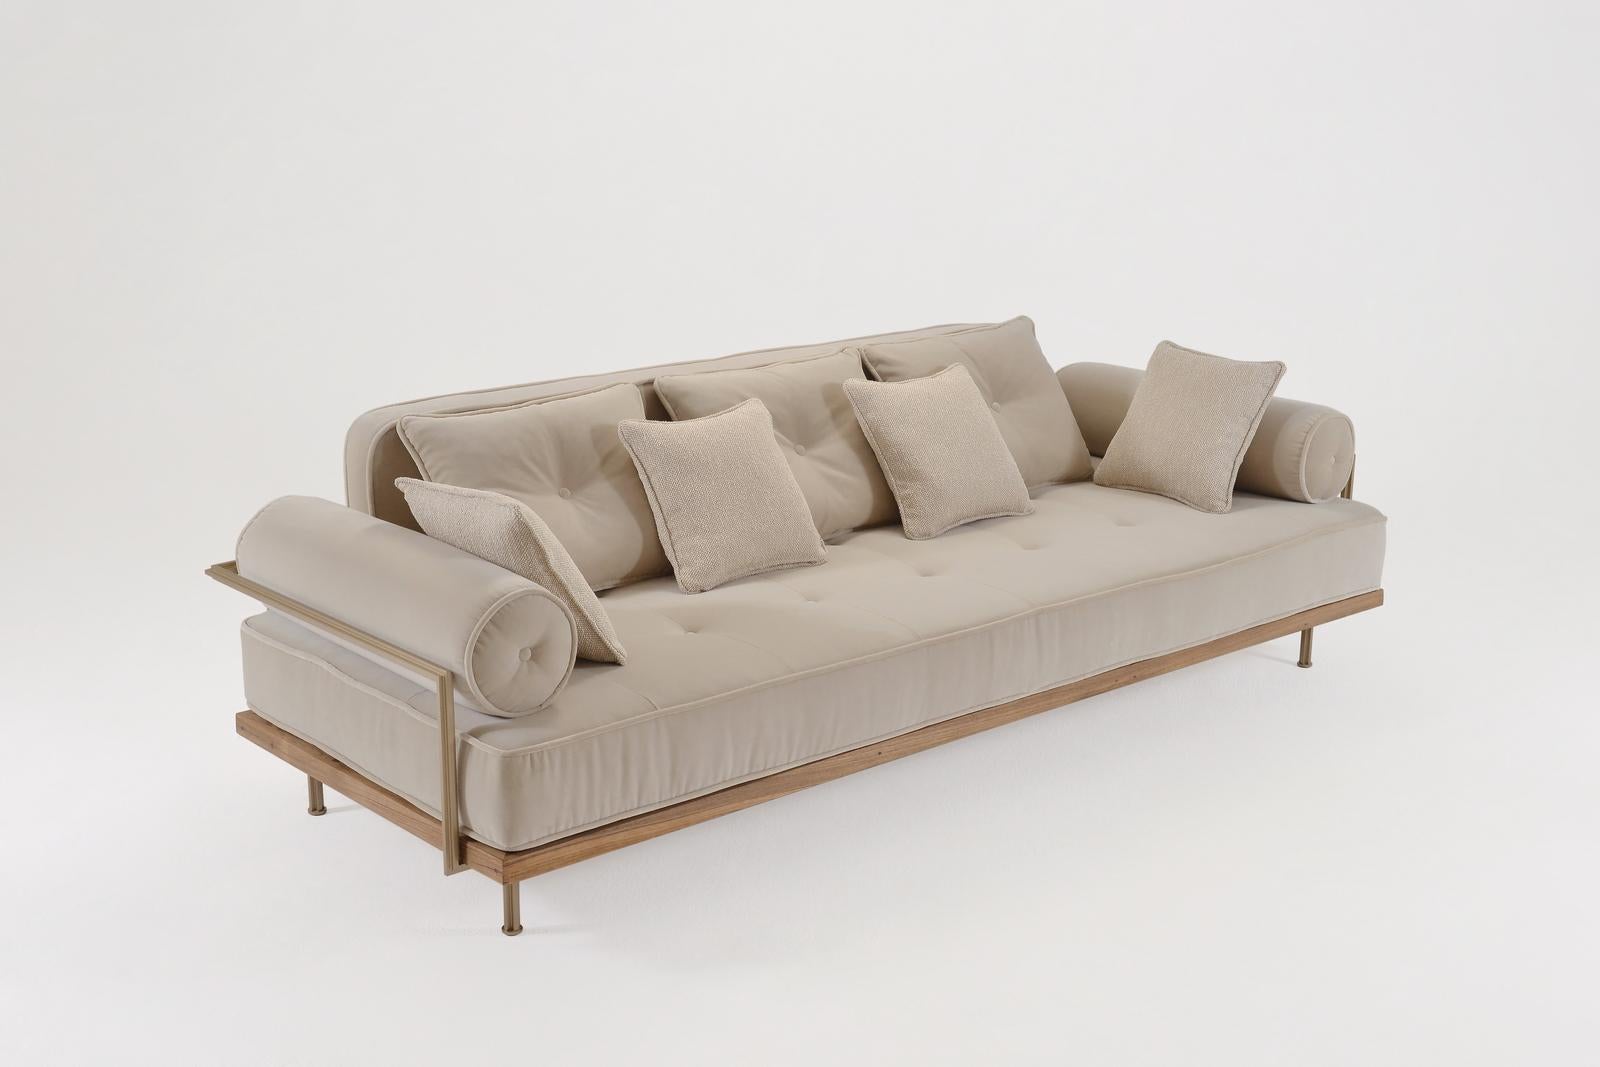 Mid-Century Modern Bespoke 3 Seater Sofa Bleached Hardwood & Brass Frame by P. Tendercool (indoor) For Sale